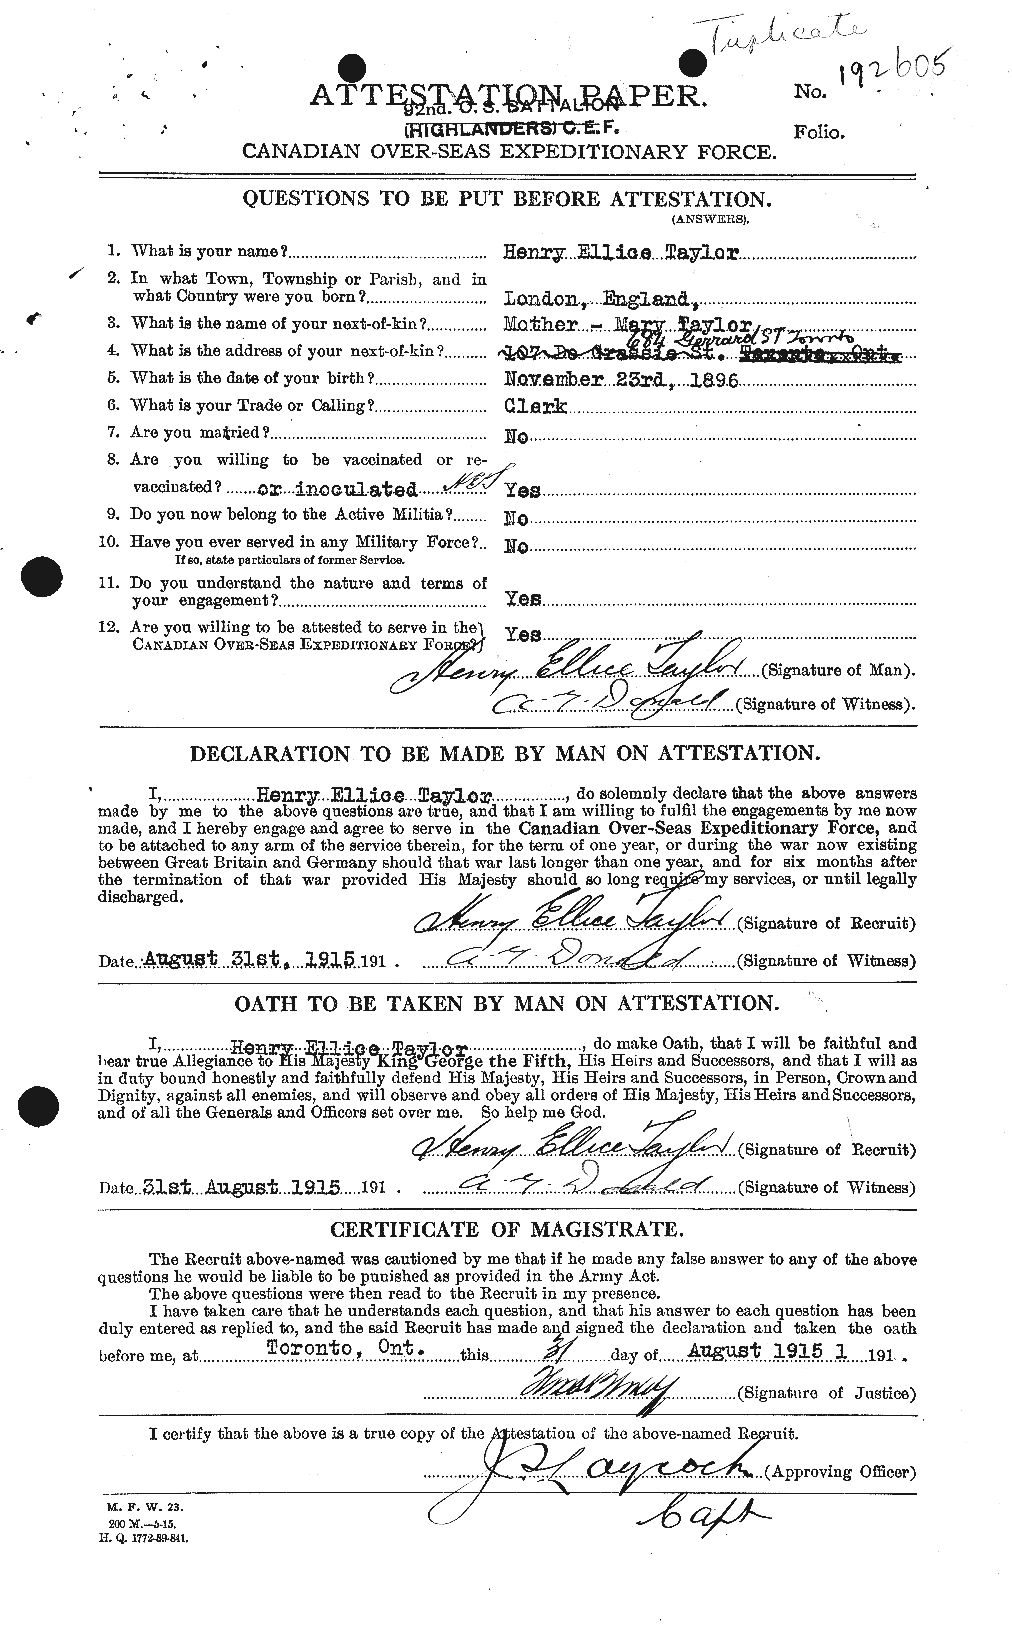 Personnel Records of the First World War - CEF 626537a